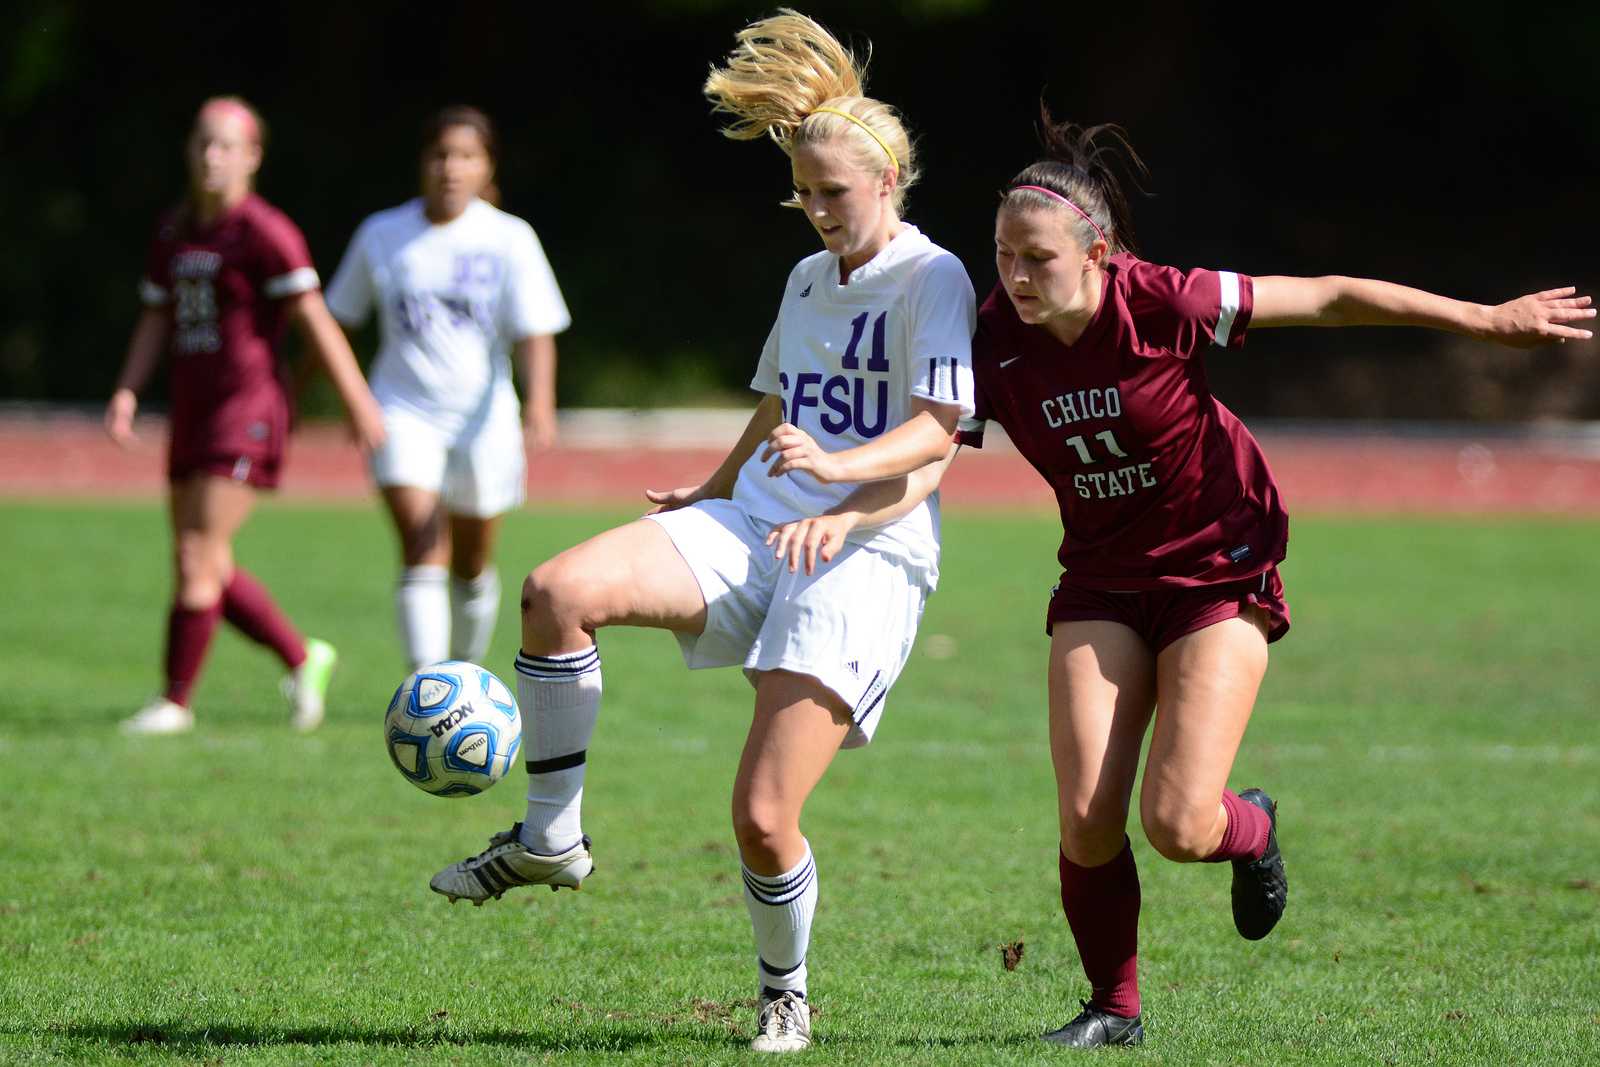 SF State's Julie Haselton (11) fights off Gail Bassett (11) for control of the ball during a game against Chico State at Cox Stadium, Oct. 6, 2013. The Gators won the game 1-0. Photo by Philip Houston / Xpress